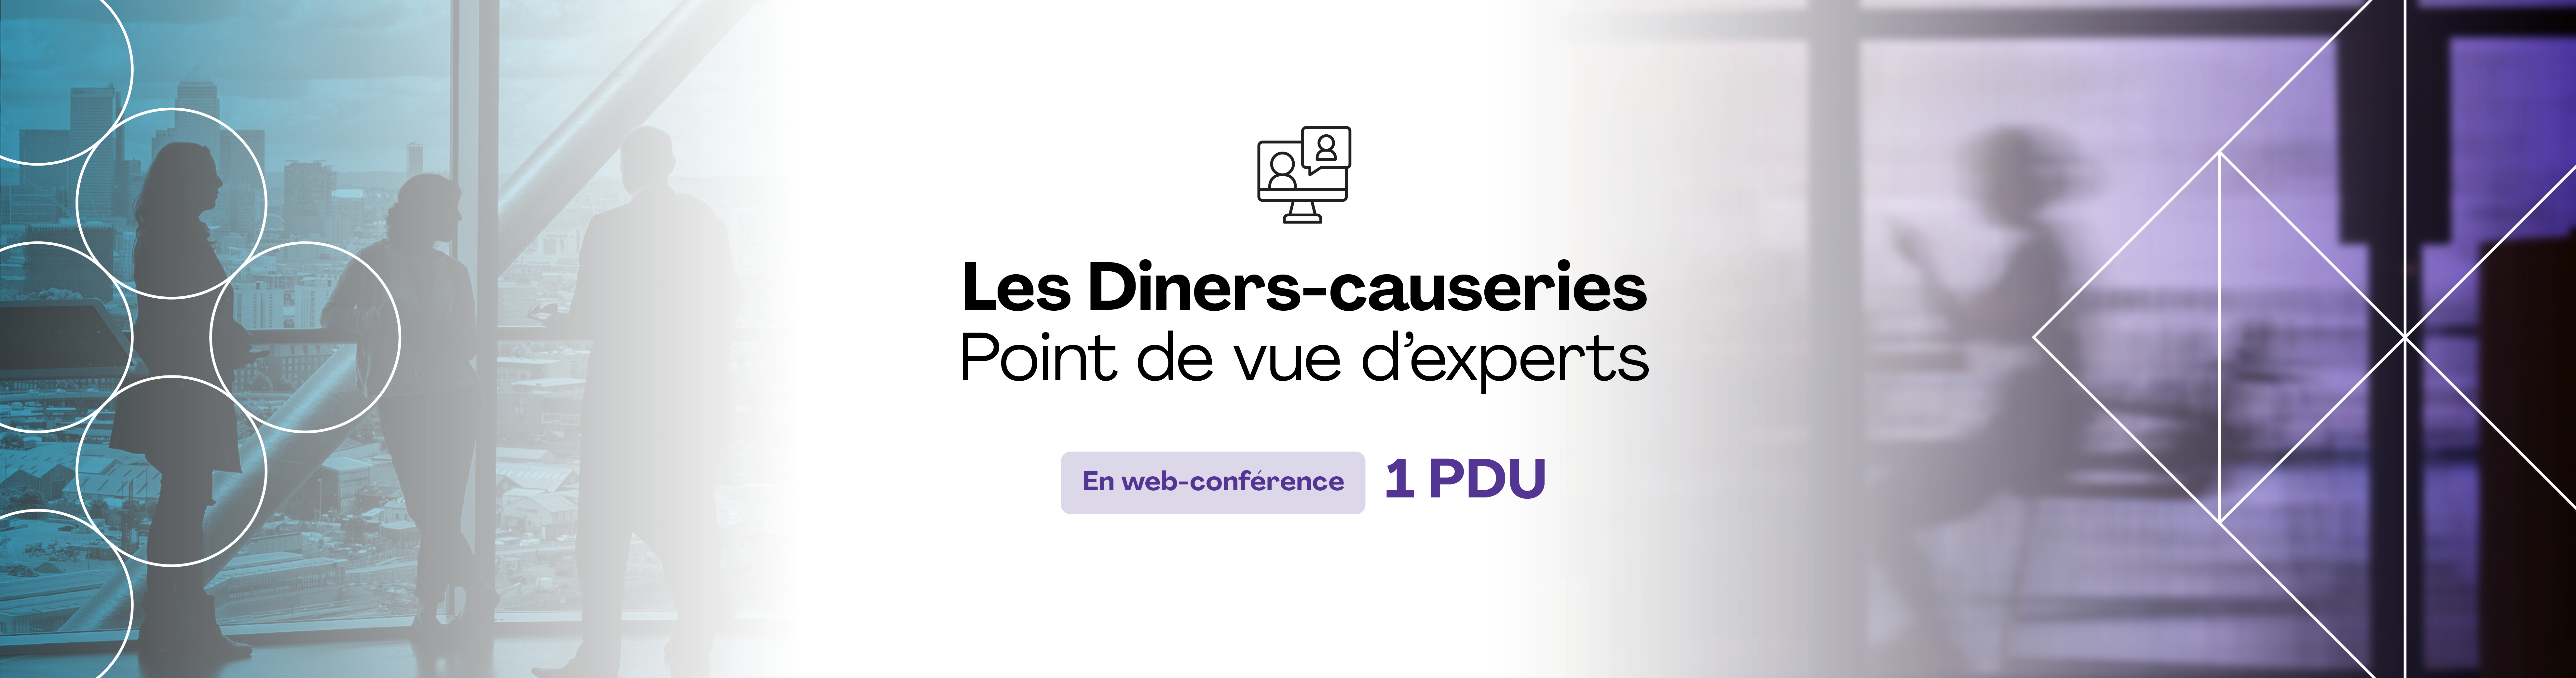 DinerCauserie_1900x500_WEB_3.png